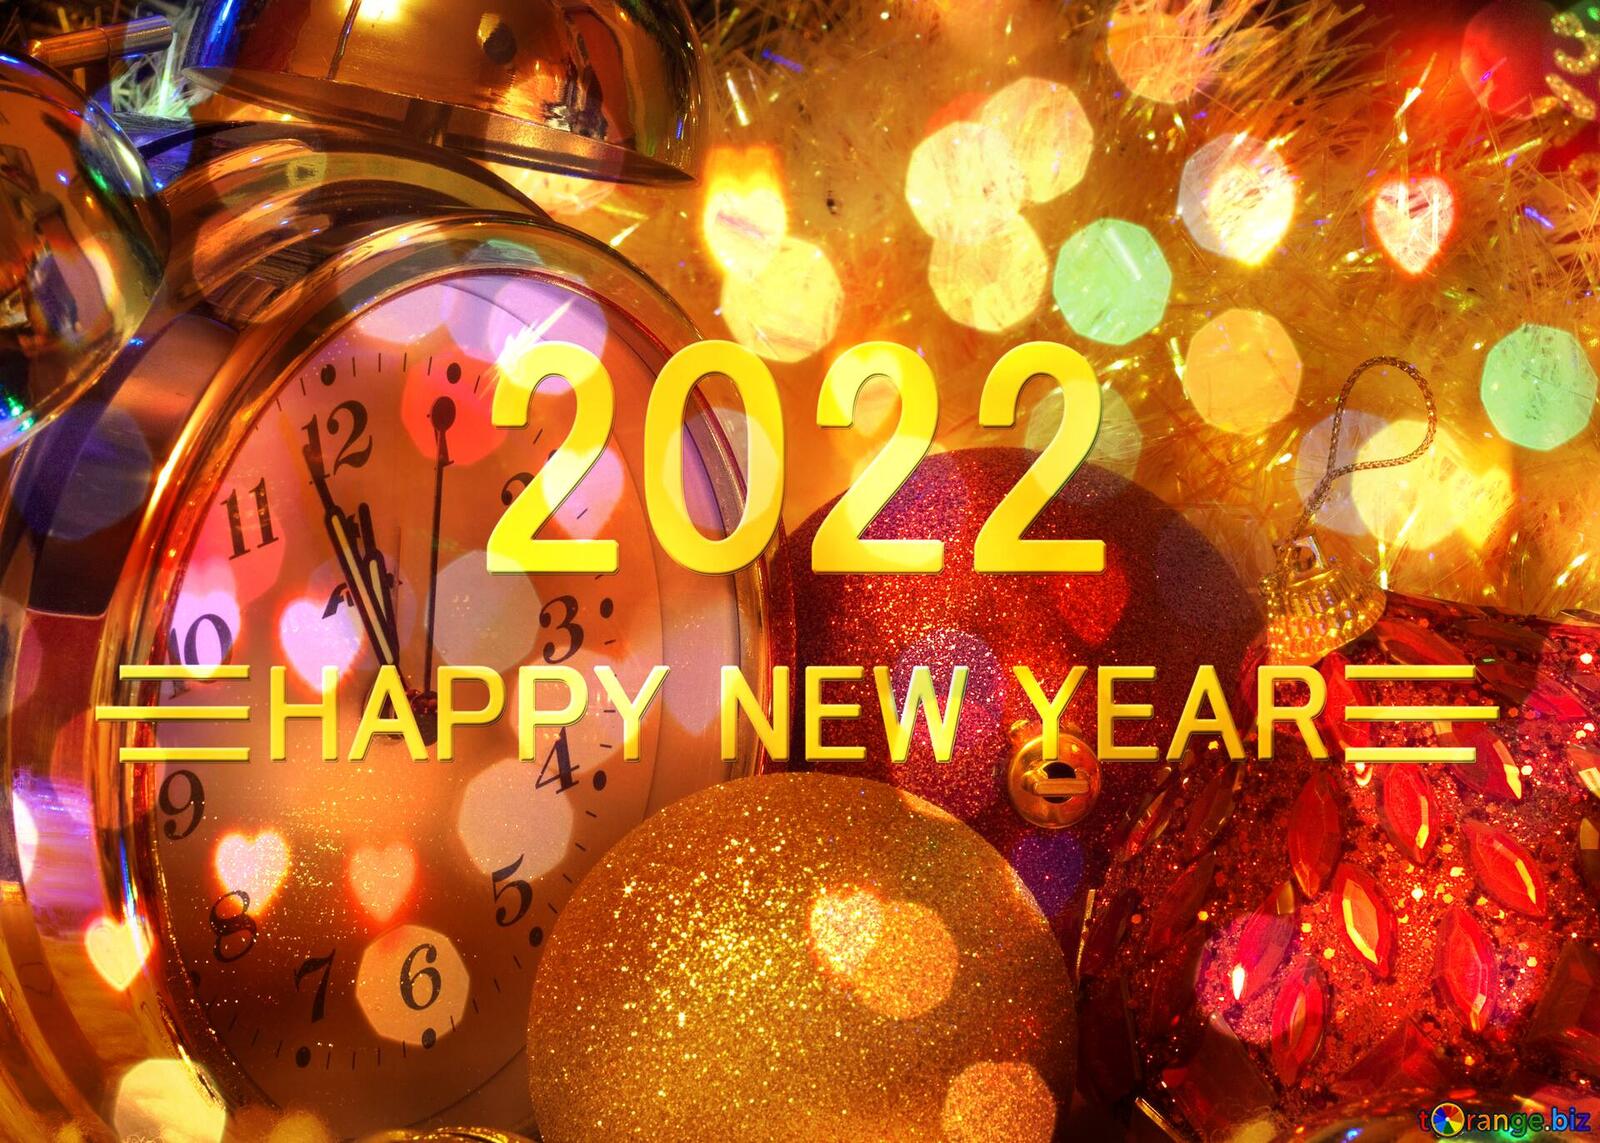 Wallpapers happy new year 2022 new year 2022 new year on the desktop